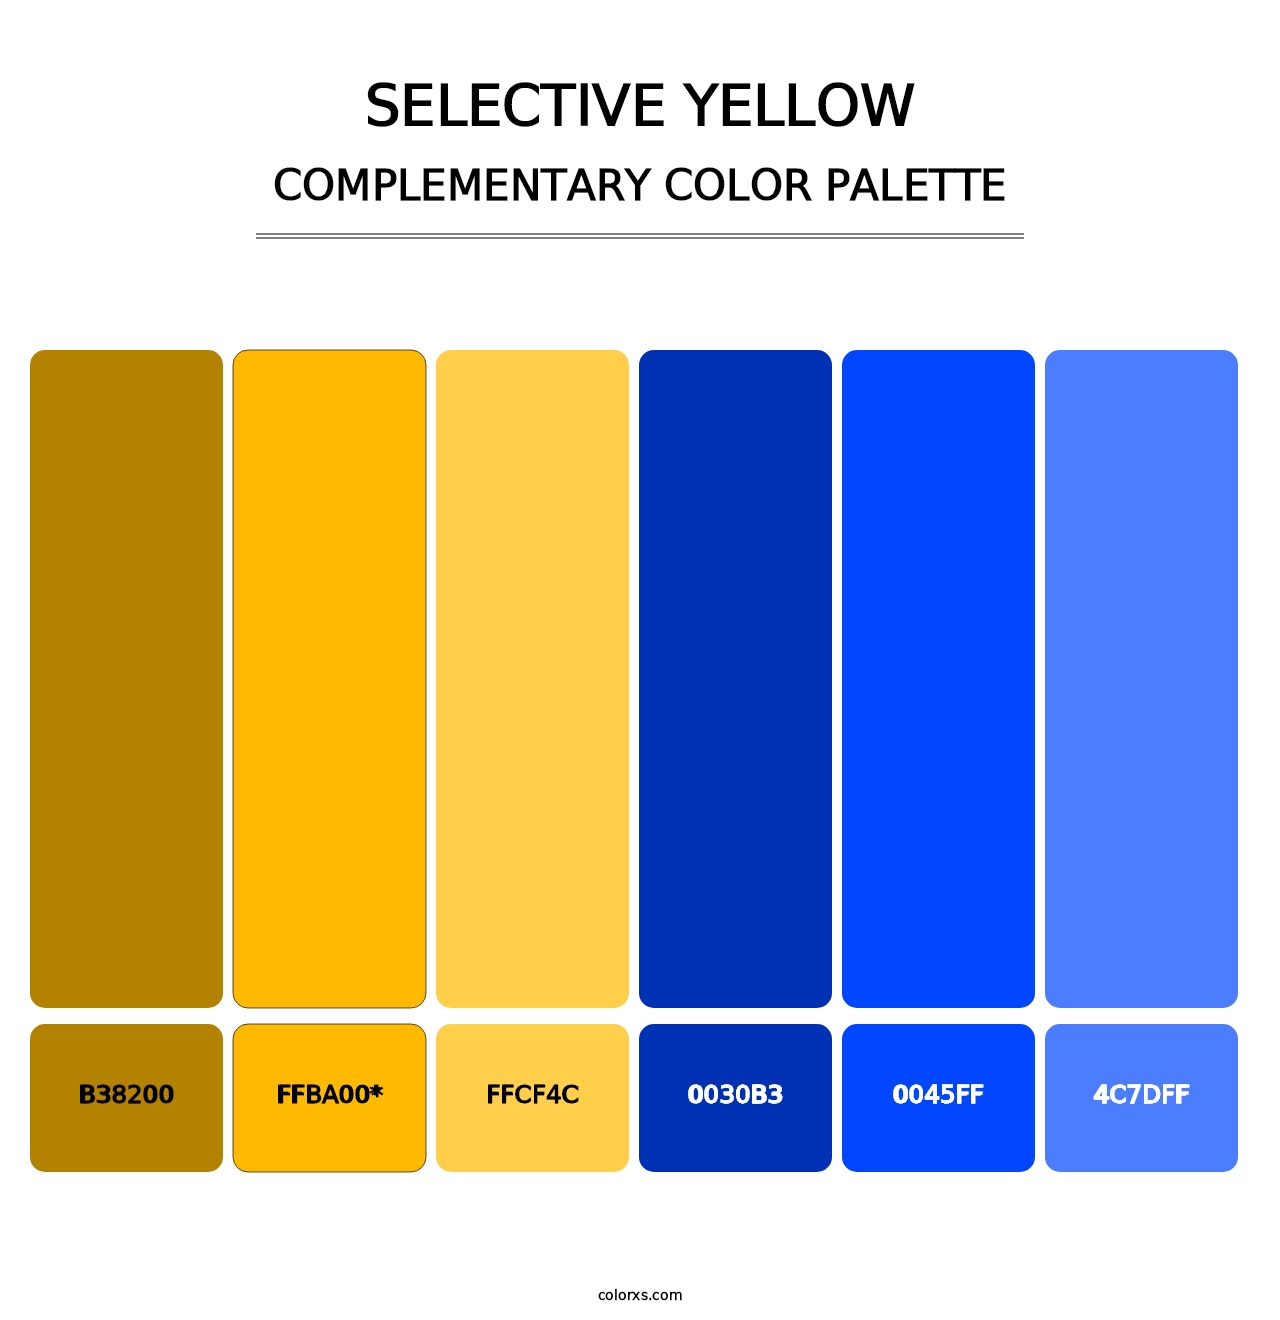 Selective yellow - Complementary Color Palette